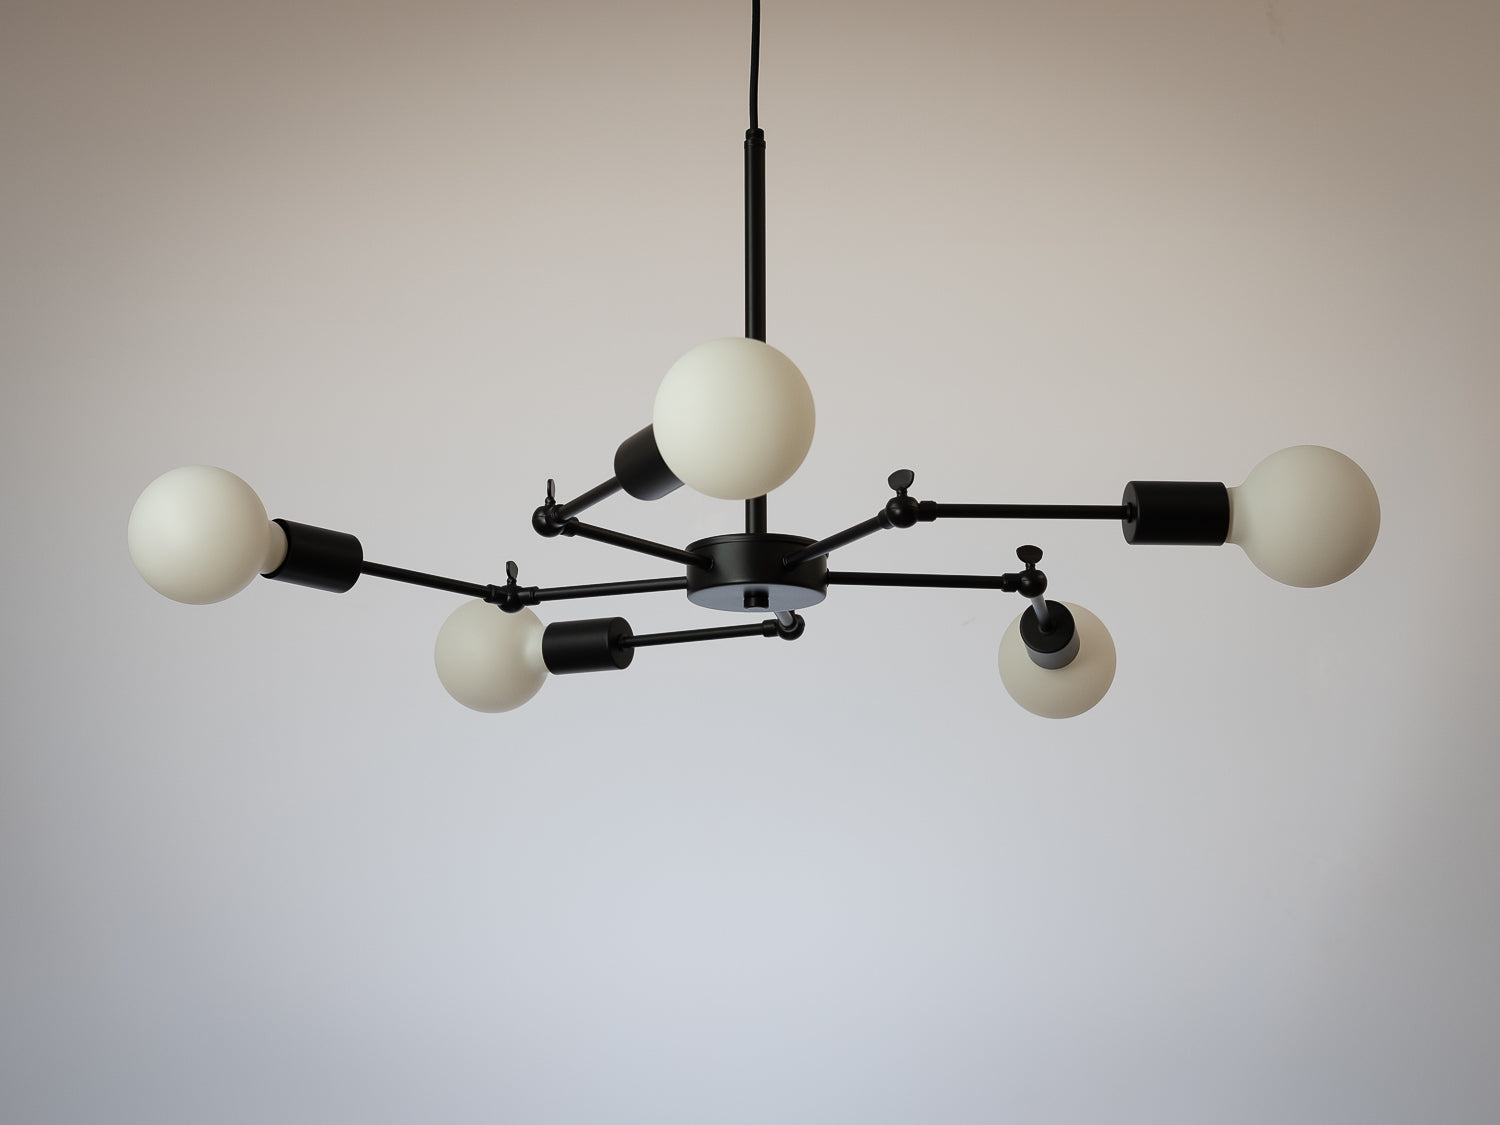 Daddy Long Legs Chandelier - Black or Old Gold - img611afaf70f0c1